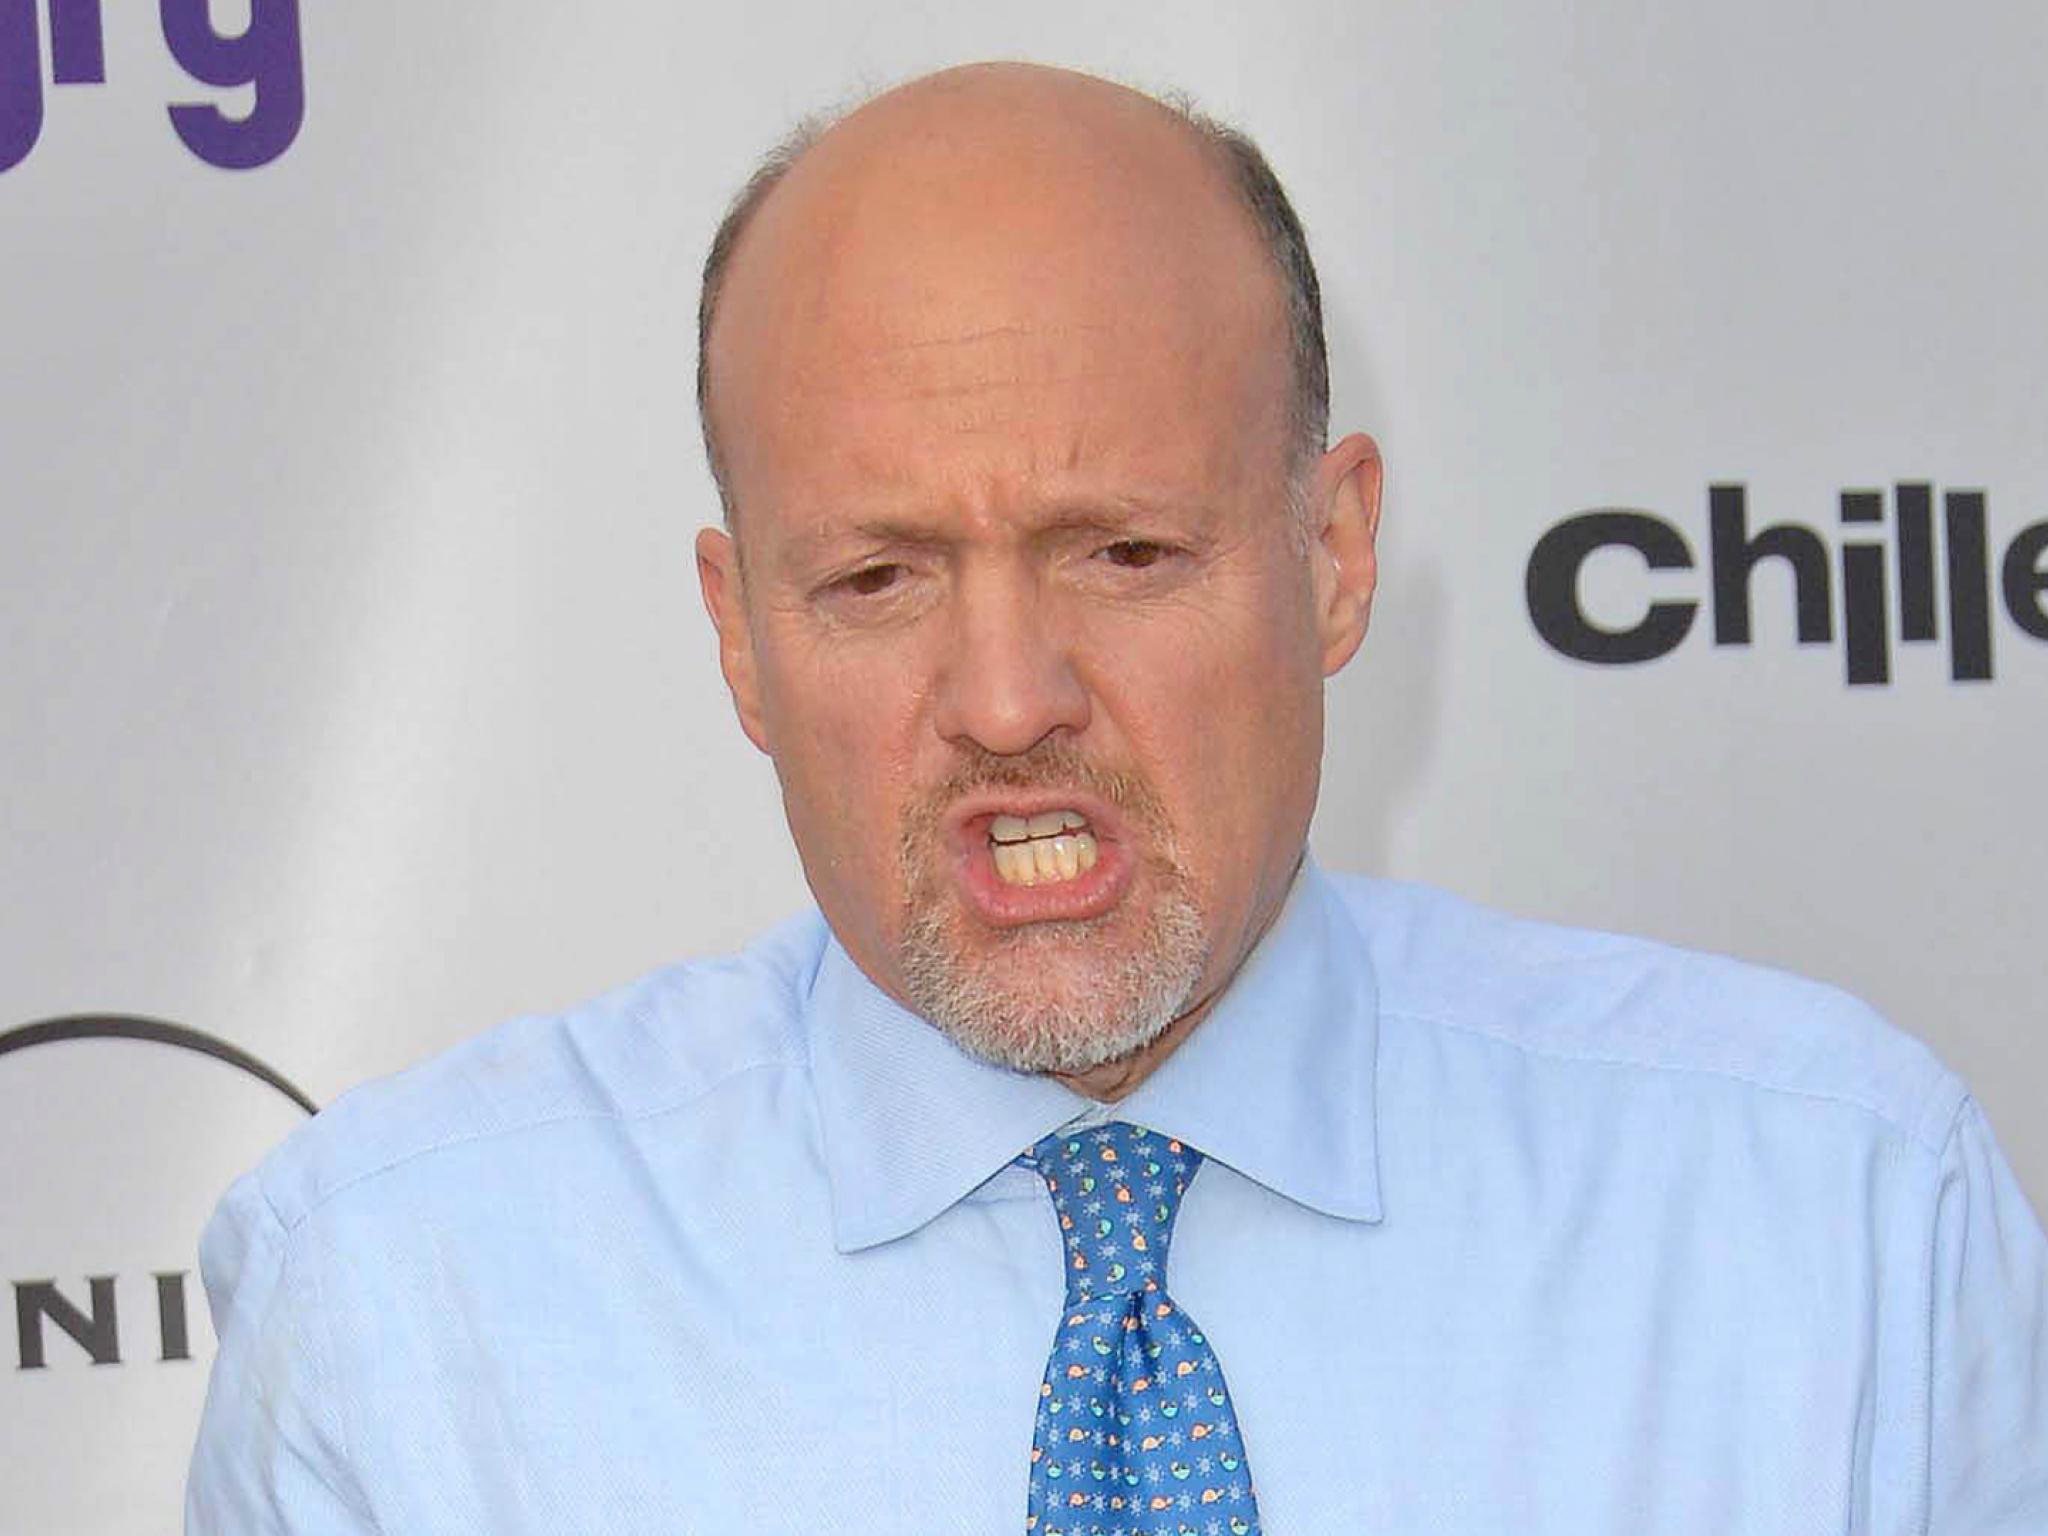  jim-cramer-asks-why-the-worlds-largest-healthcare-products-company-has-an-ill-advised-strategy 